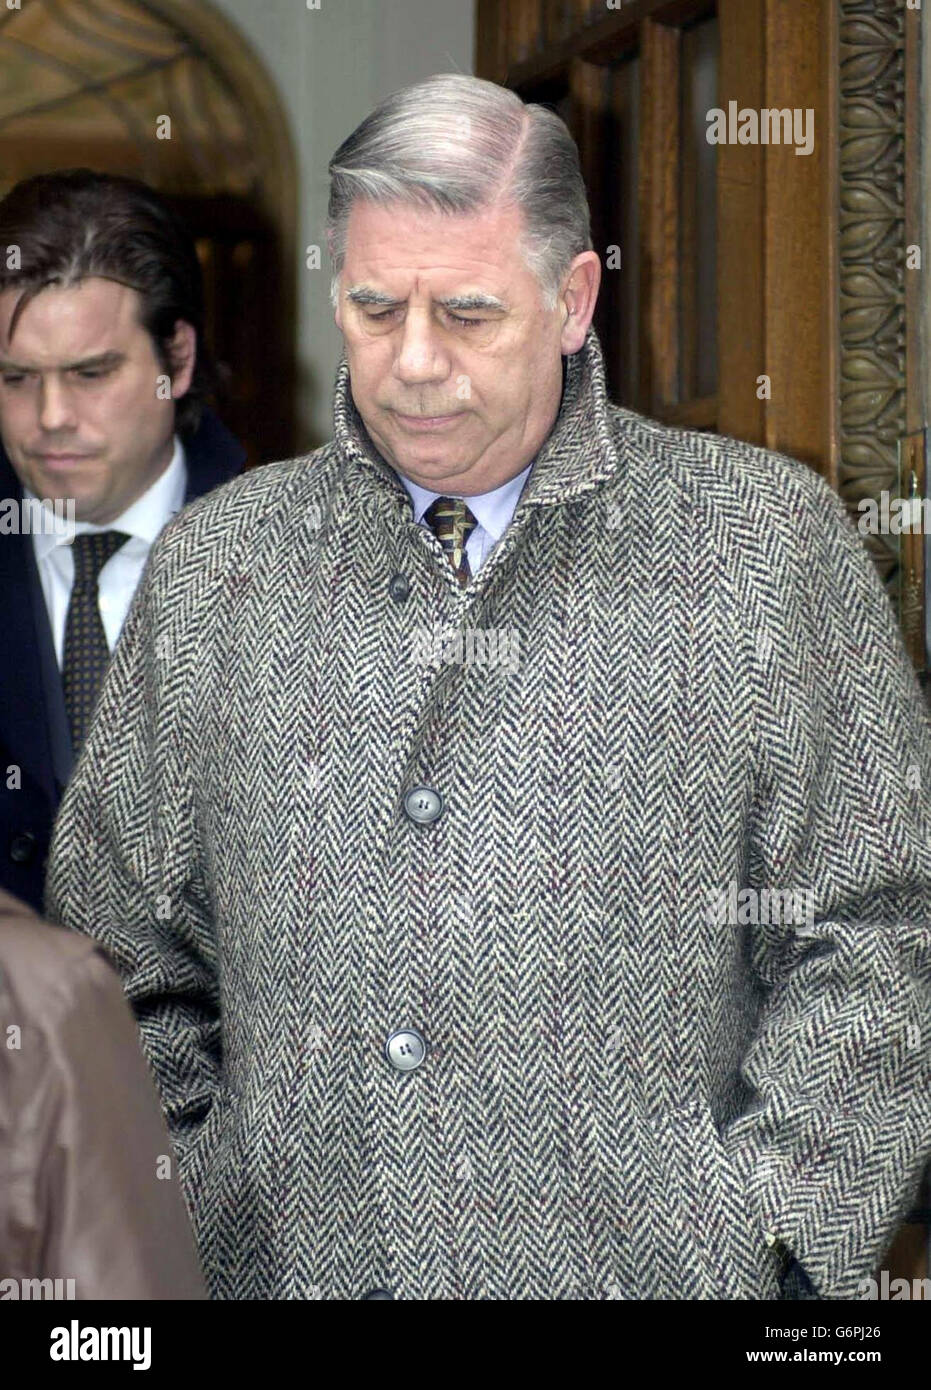 Consultant urologist John Gethin Roberts leaves the General Medical Council, in London, where he faces charges of serious professional misconduct. Graham Reeves, a Korean War veteran, died five weeks after an operation in which the wrong kidney was removed. Stock Photo